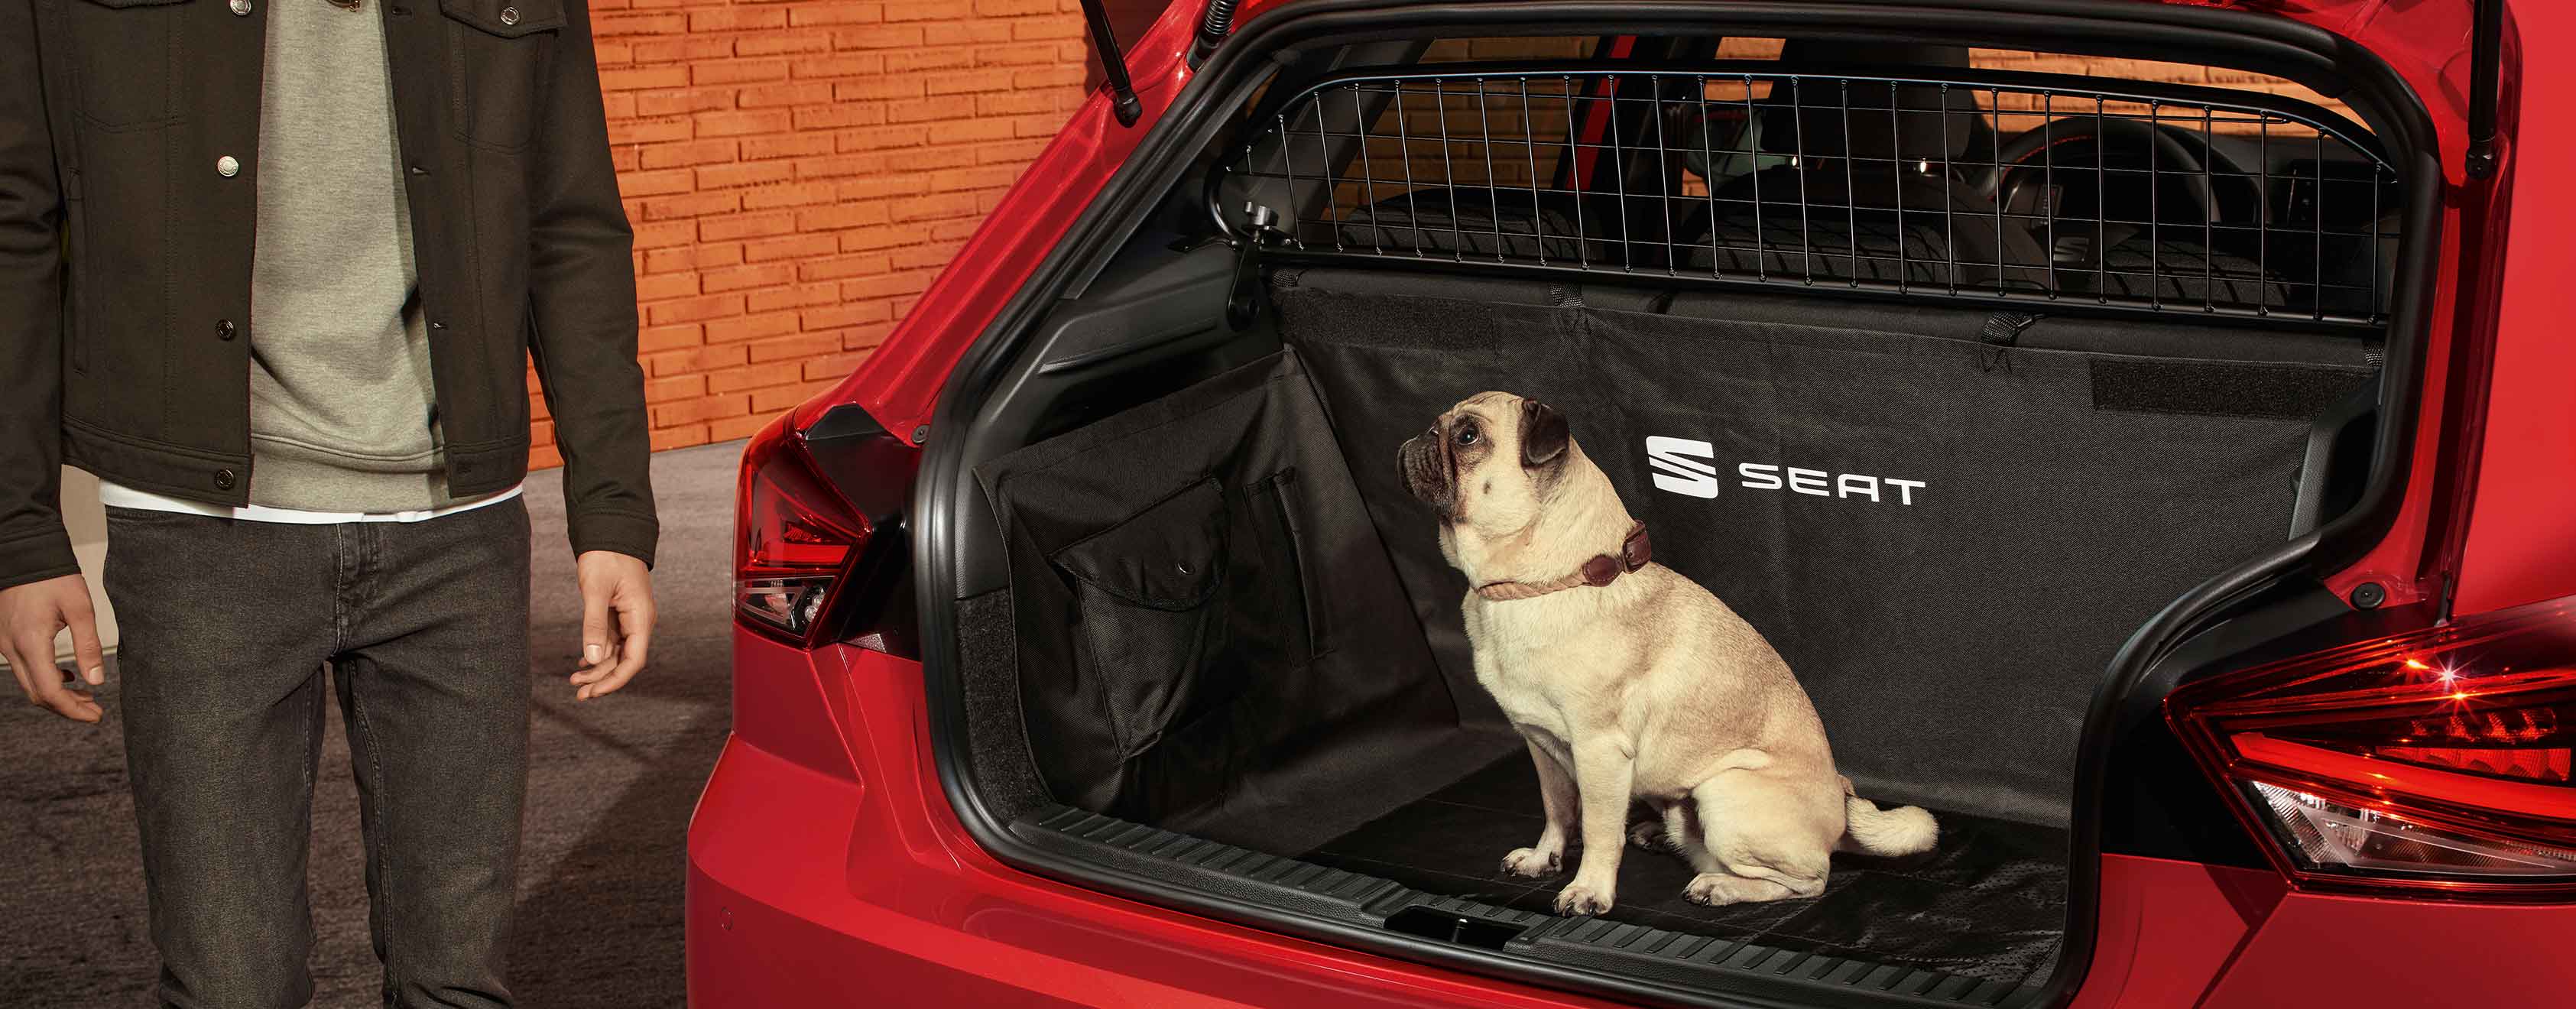 Dog sitting on SEAT Ibiza's boot with separation grille